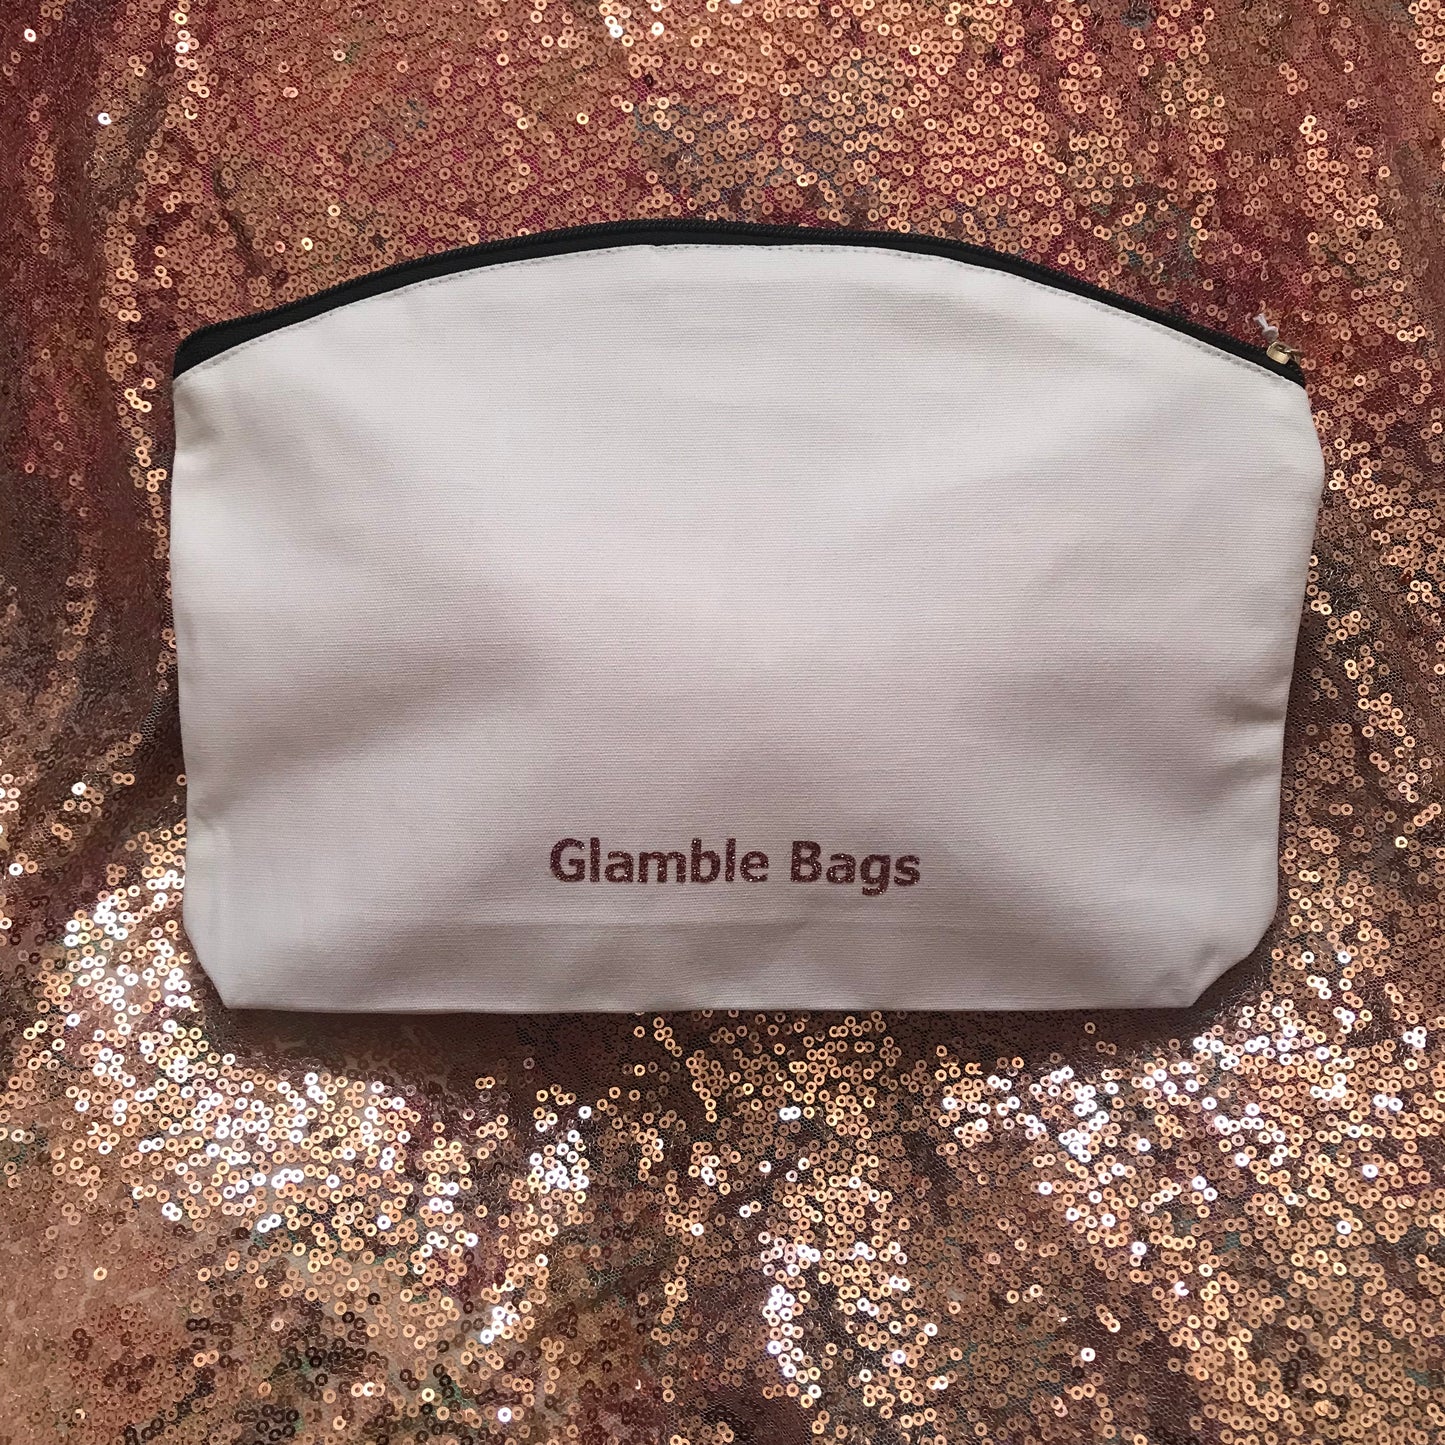 Mother of the Bride - Glamble Bags